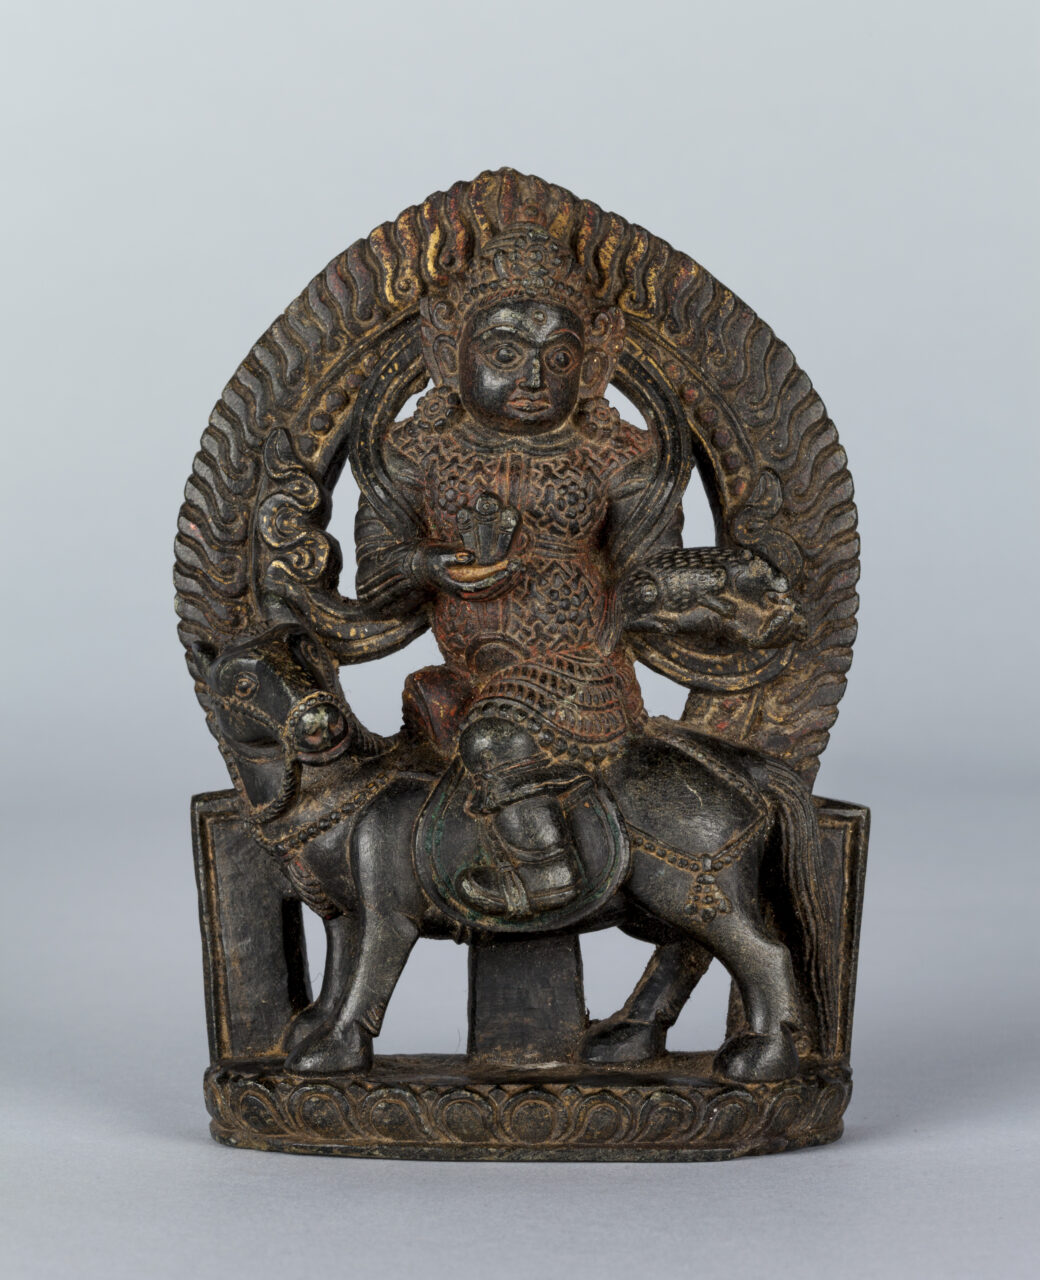 Dark brown sculpture with traces of gilding depicting deity riding on horseback before fiery nimbus